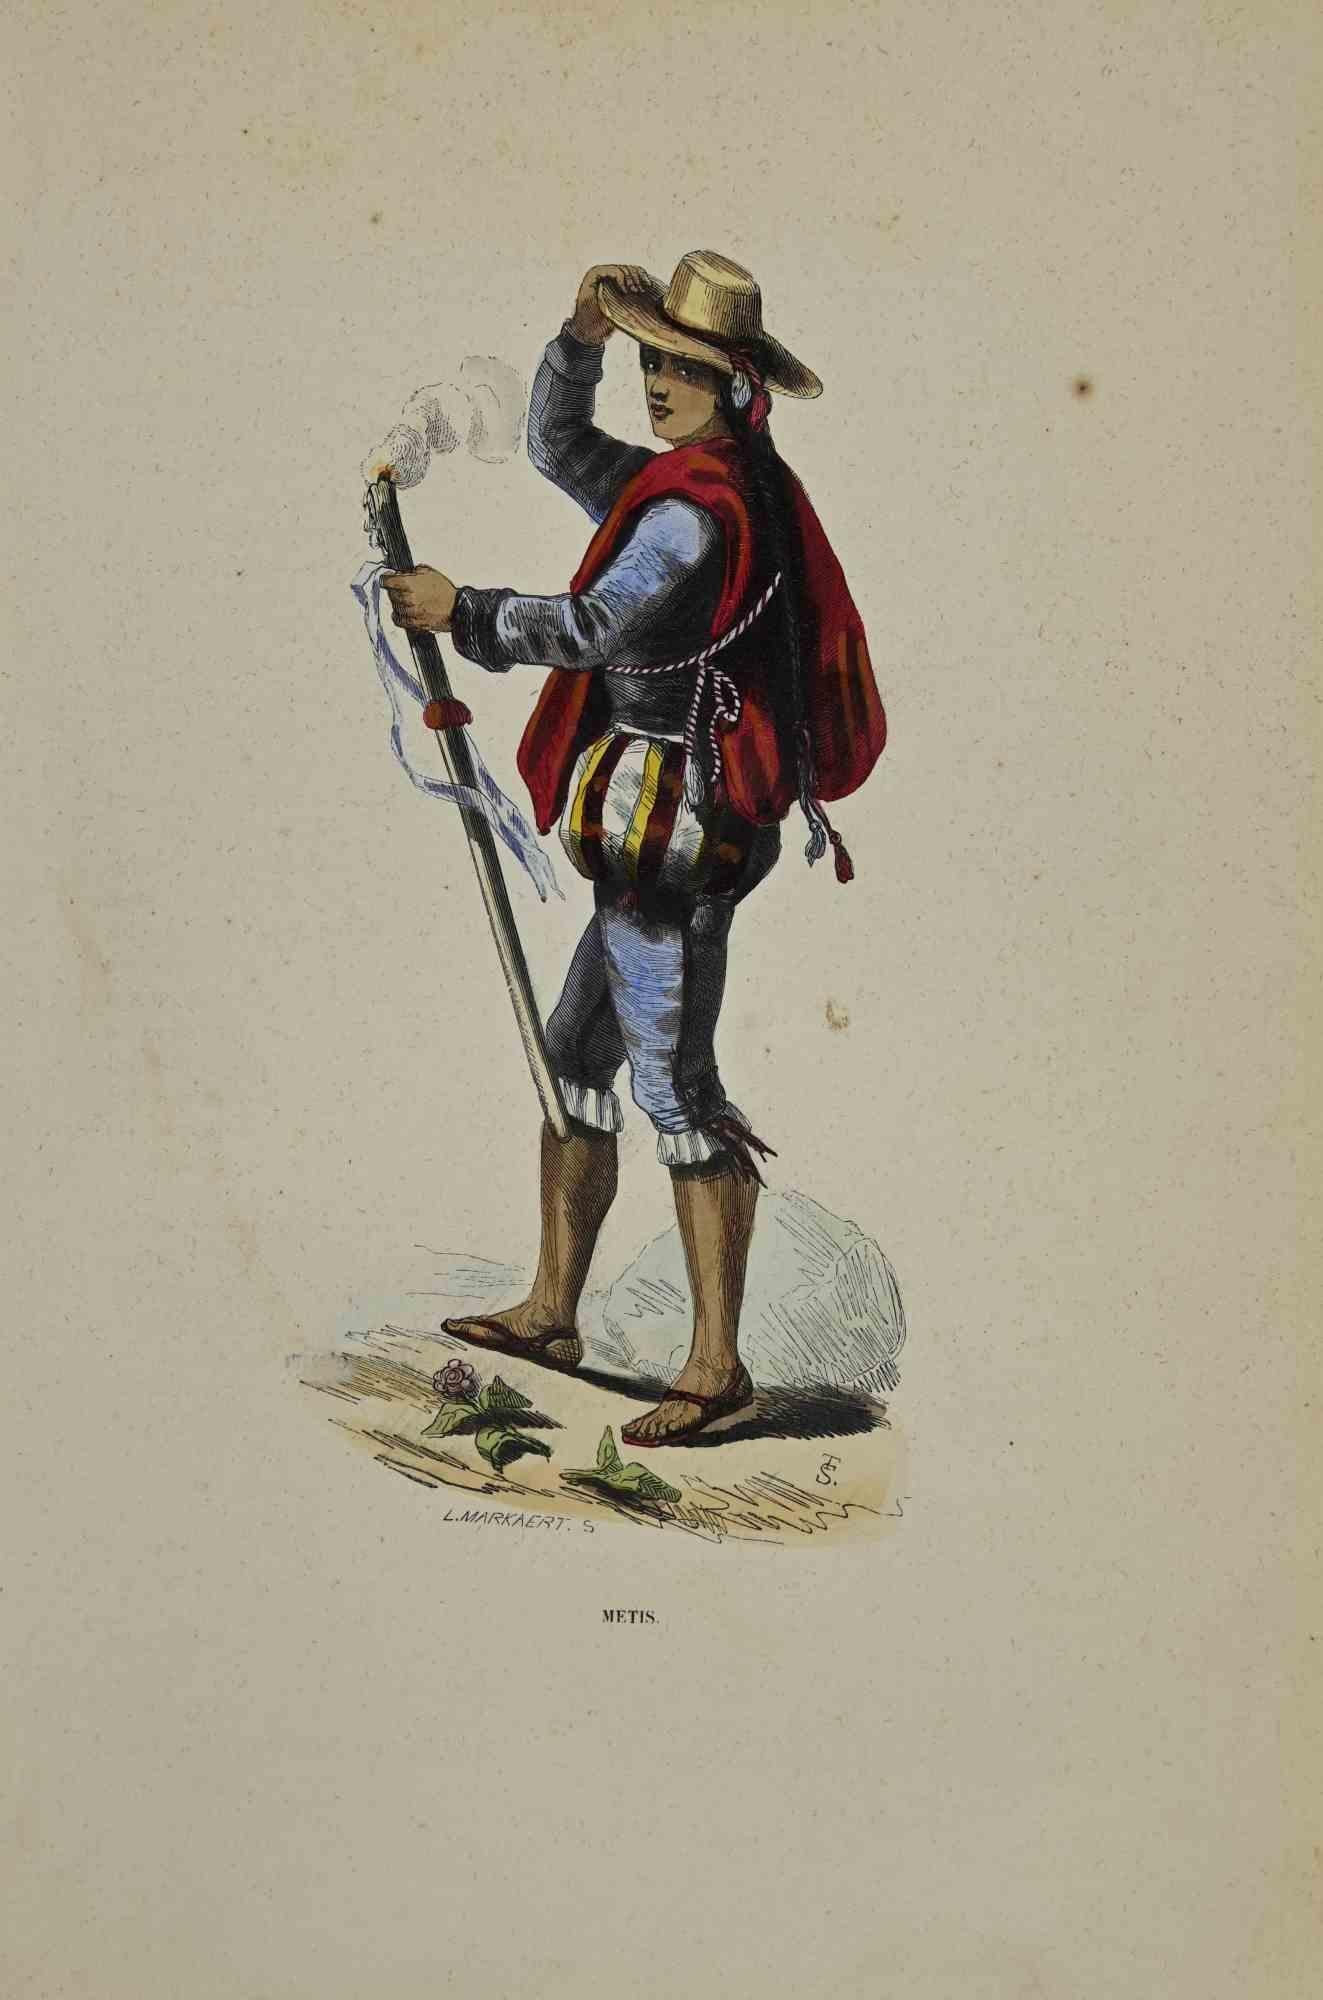 Metis - Lithograph by Auguste Wahlen - 1844